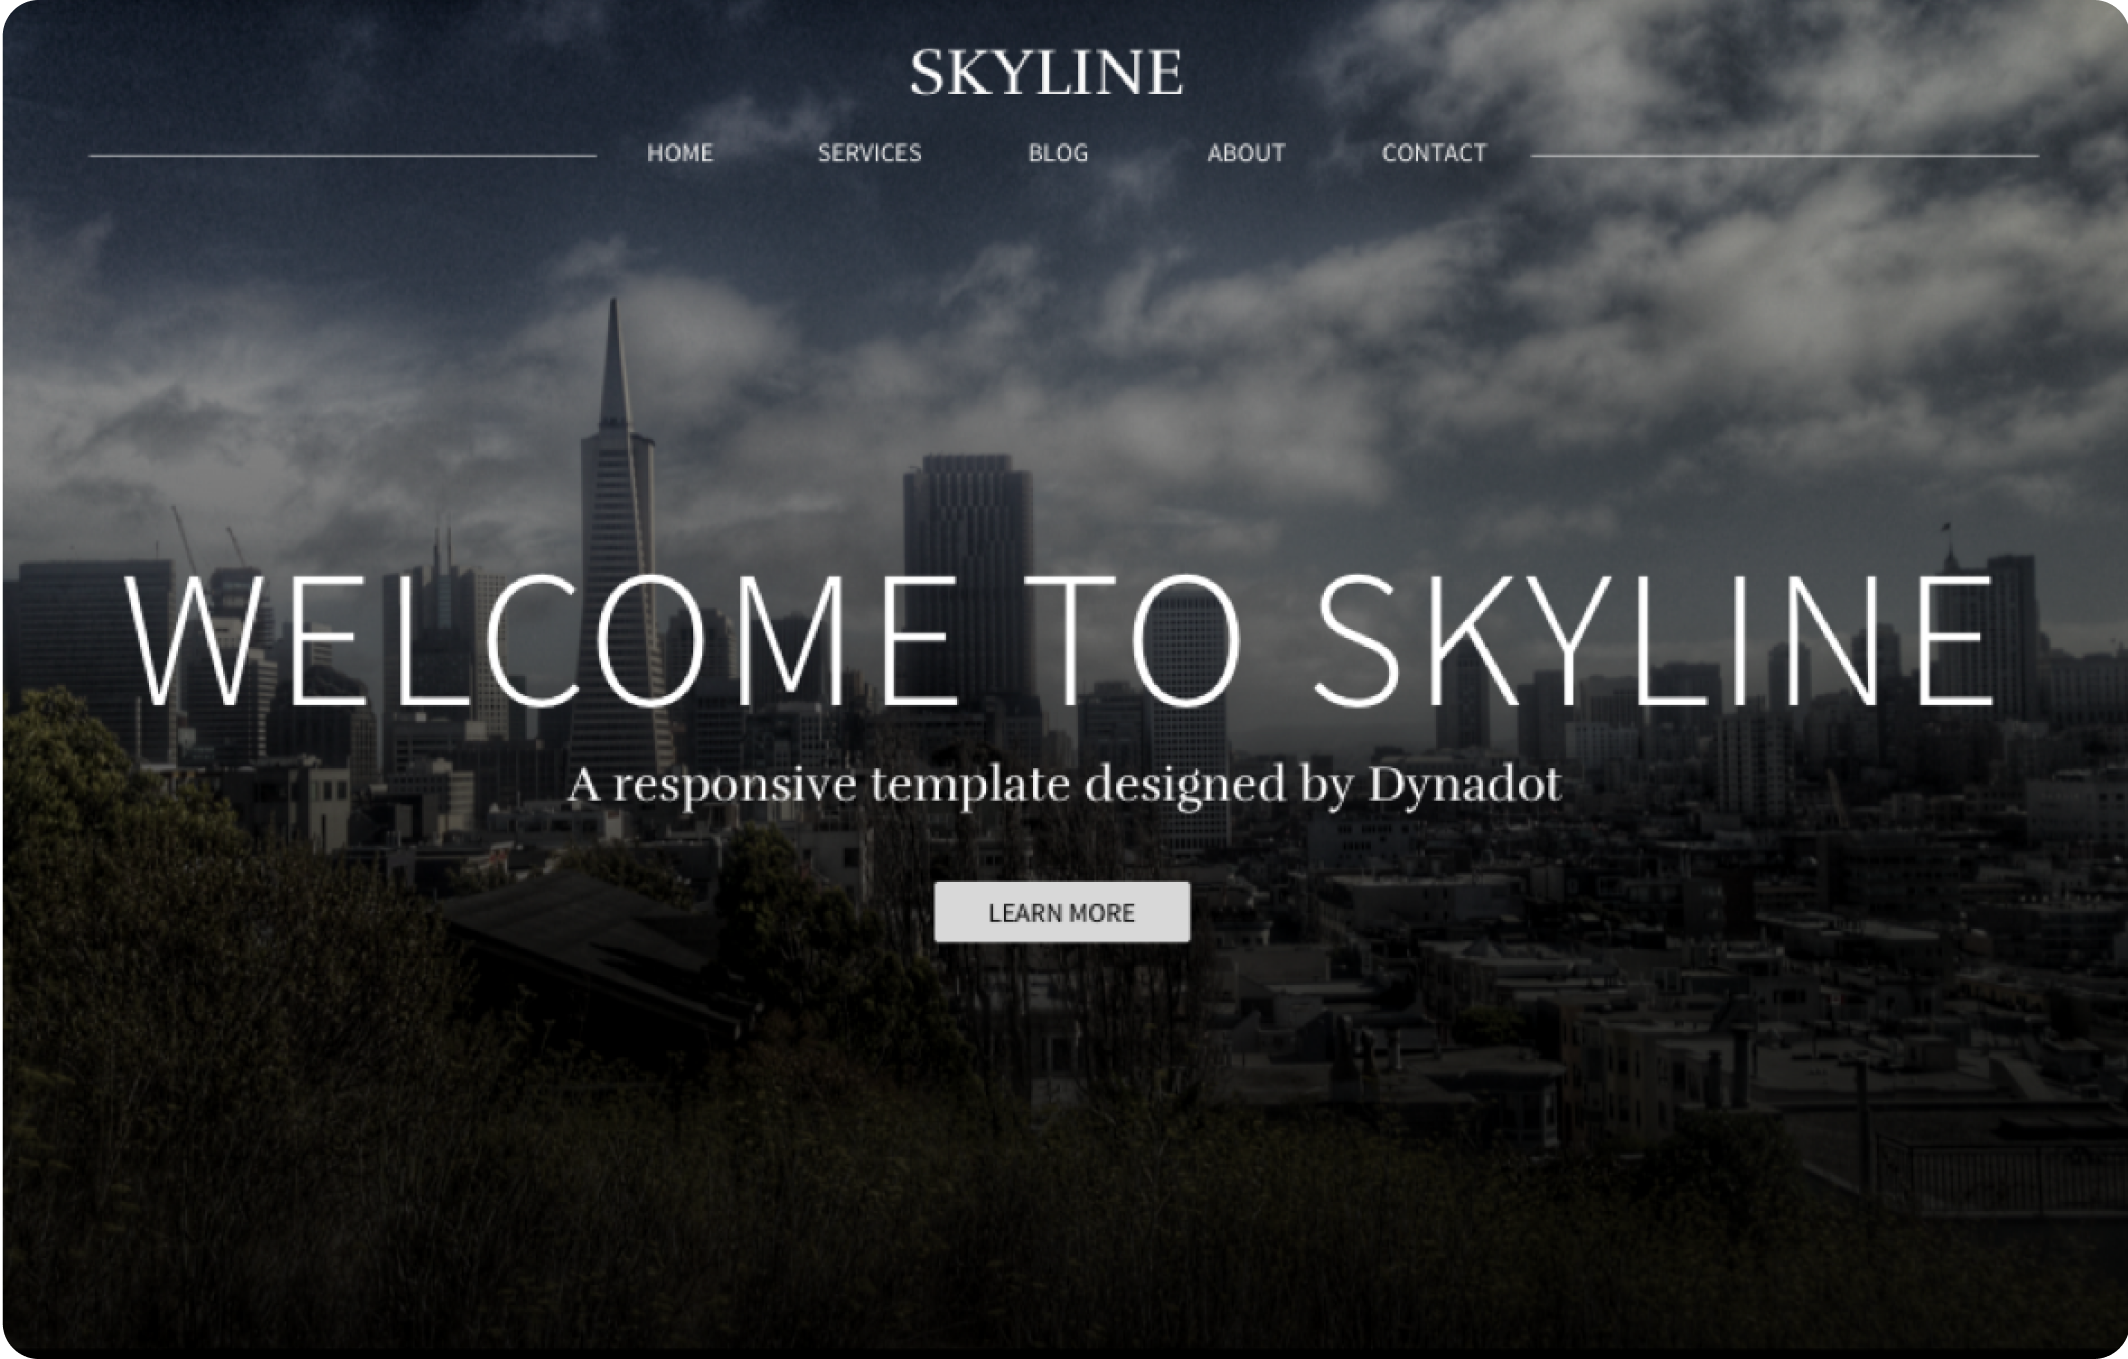 website template with beautiful image of a city skyline with large text welcoming users